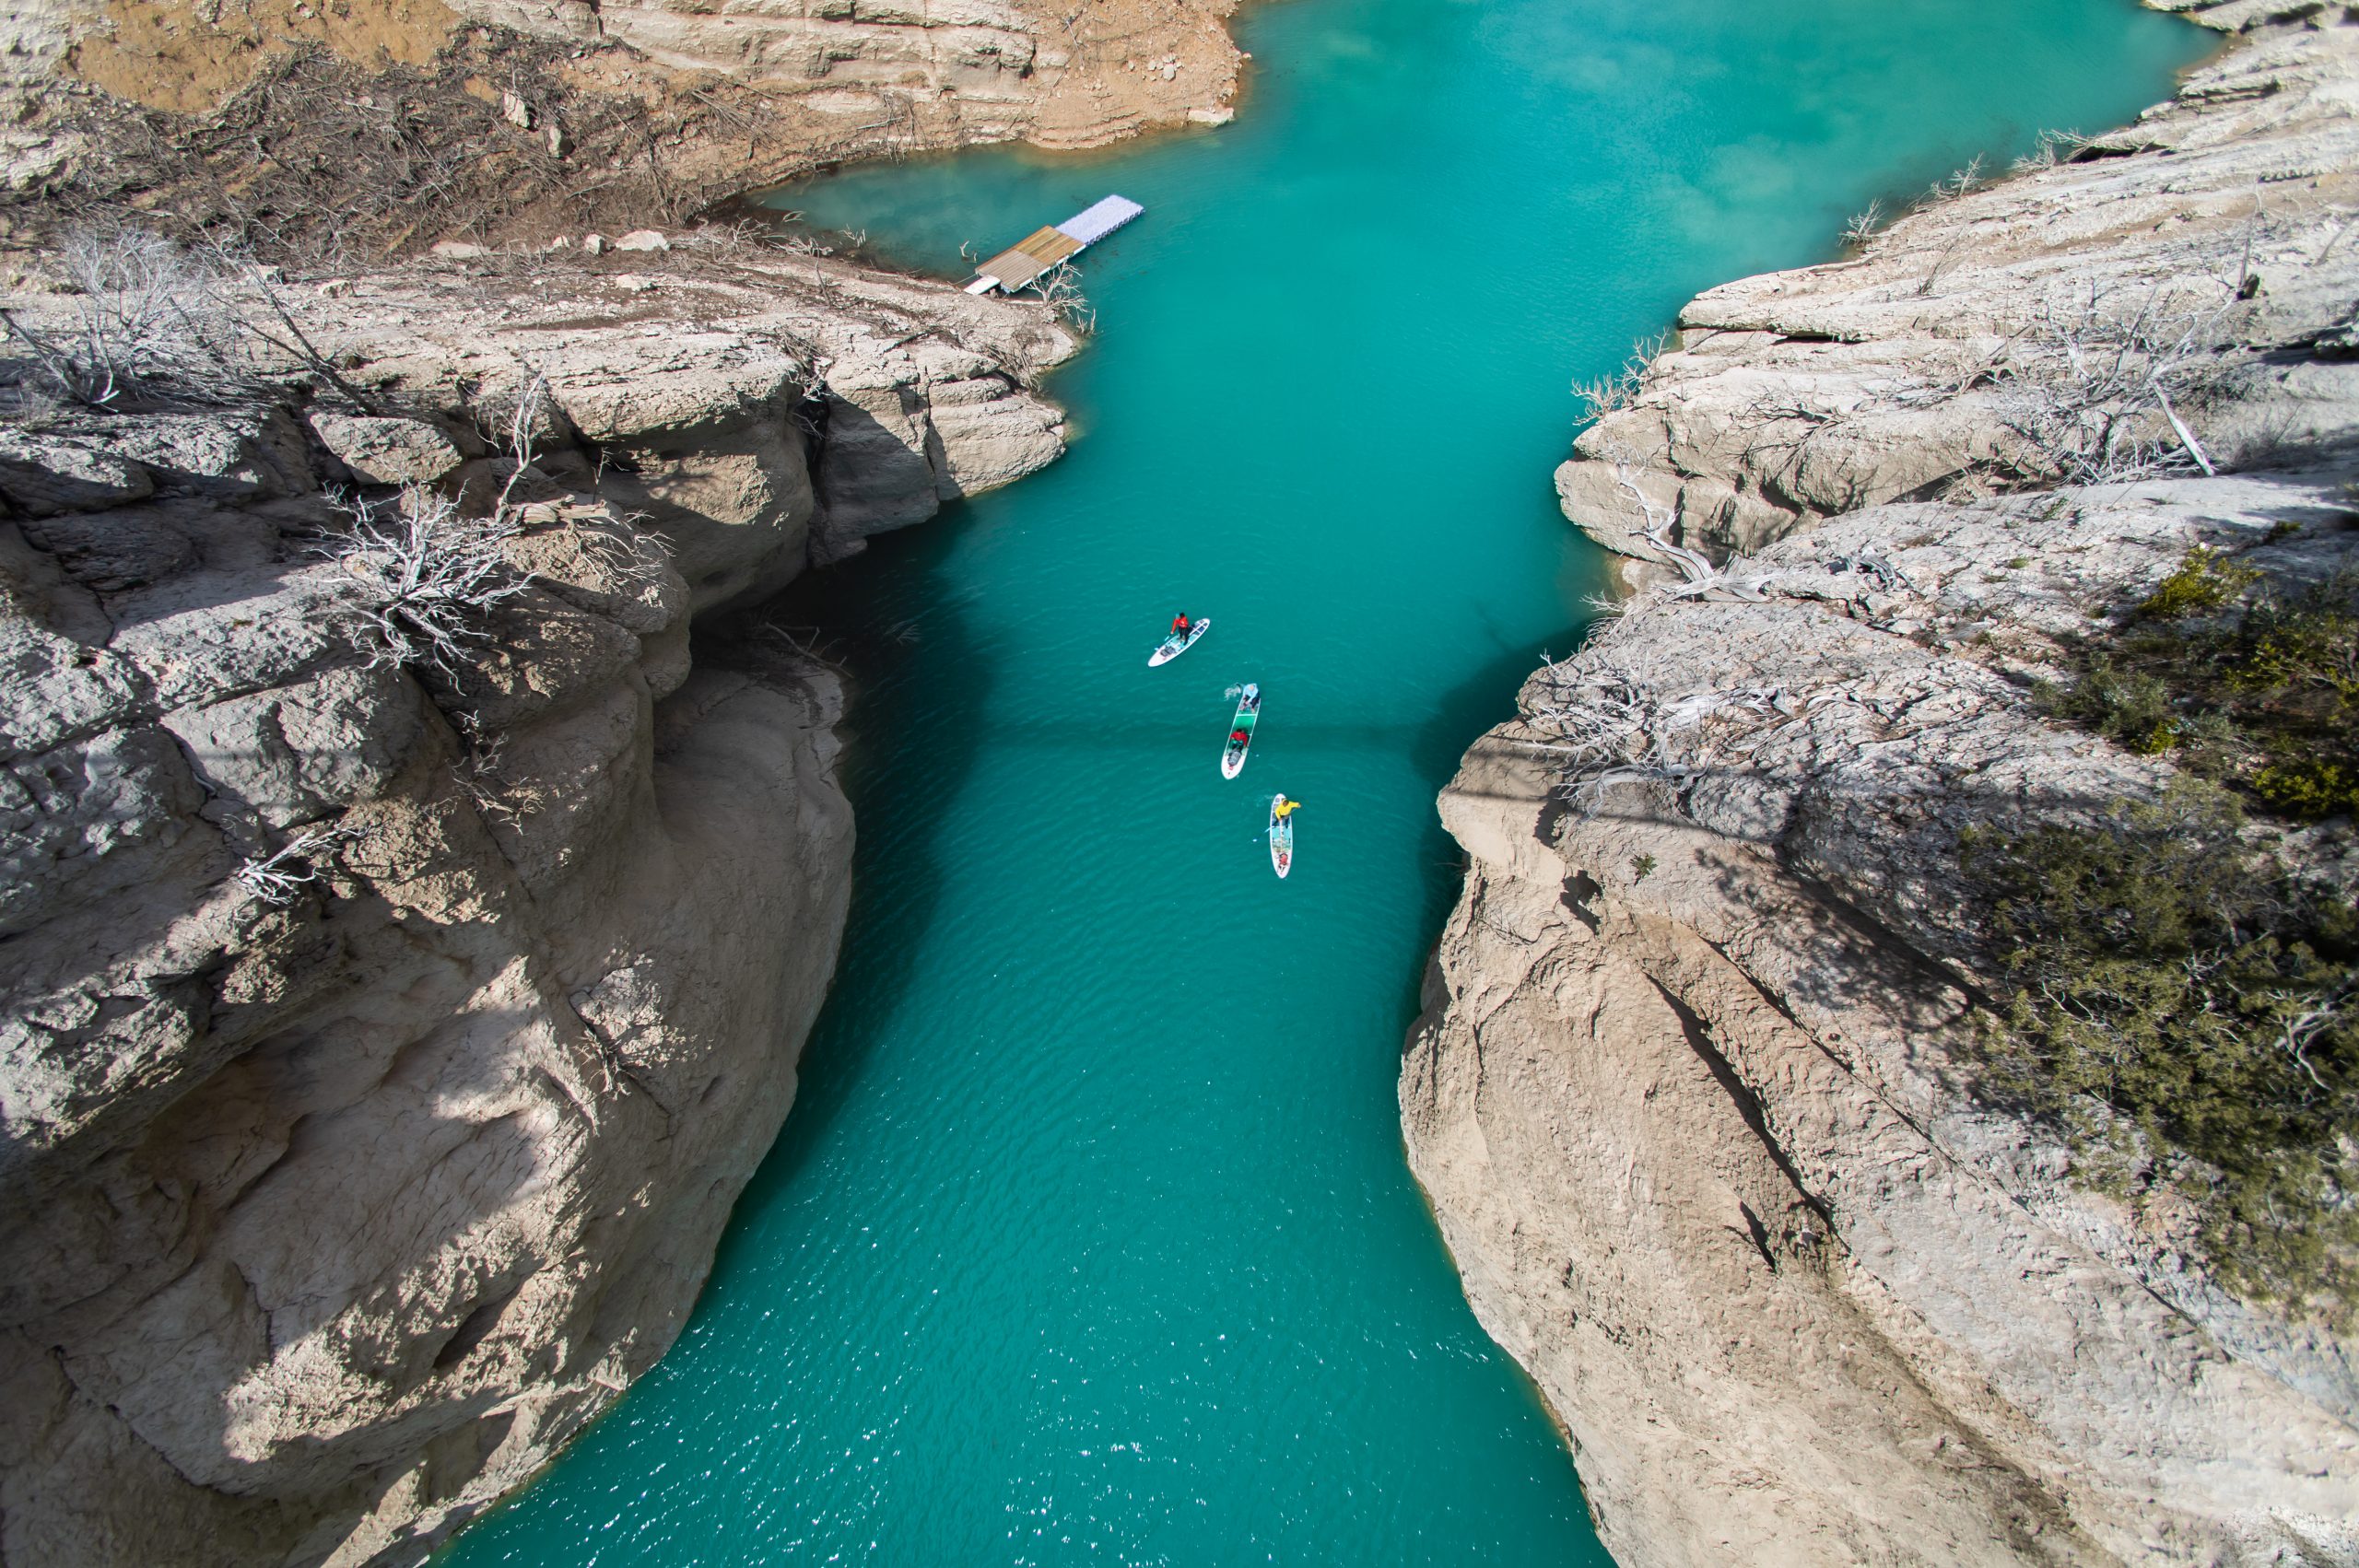 Canyon echoes and river travel – SUP’ing in a Spanish nature reserve